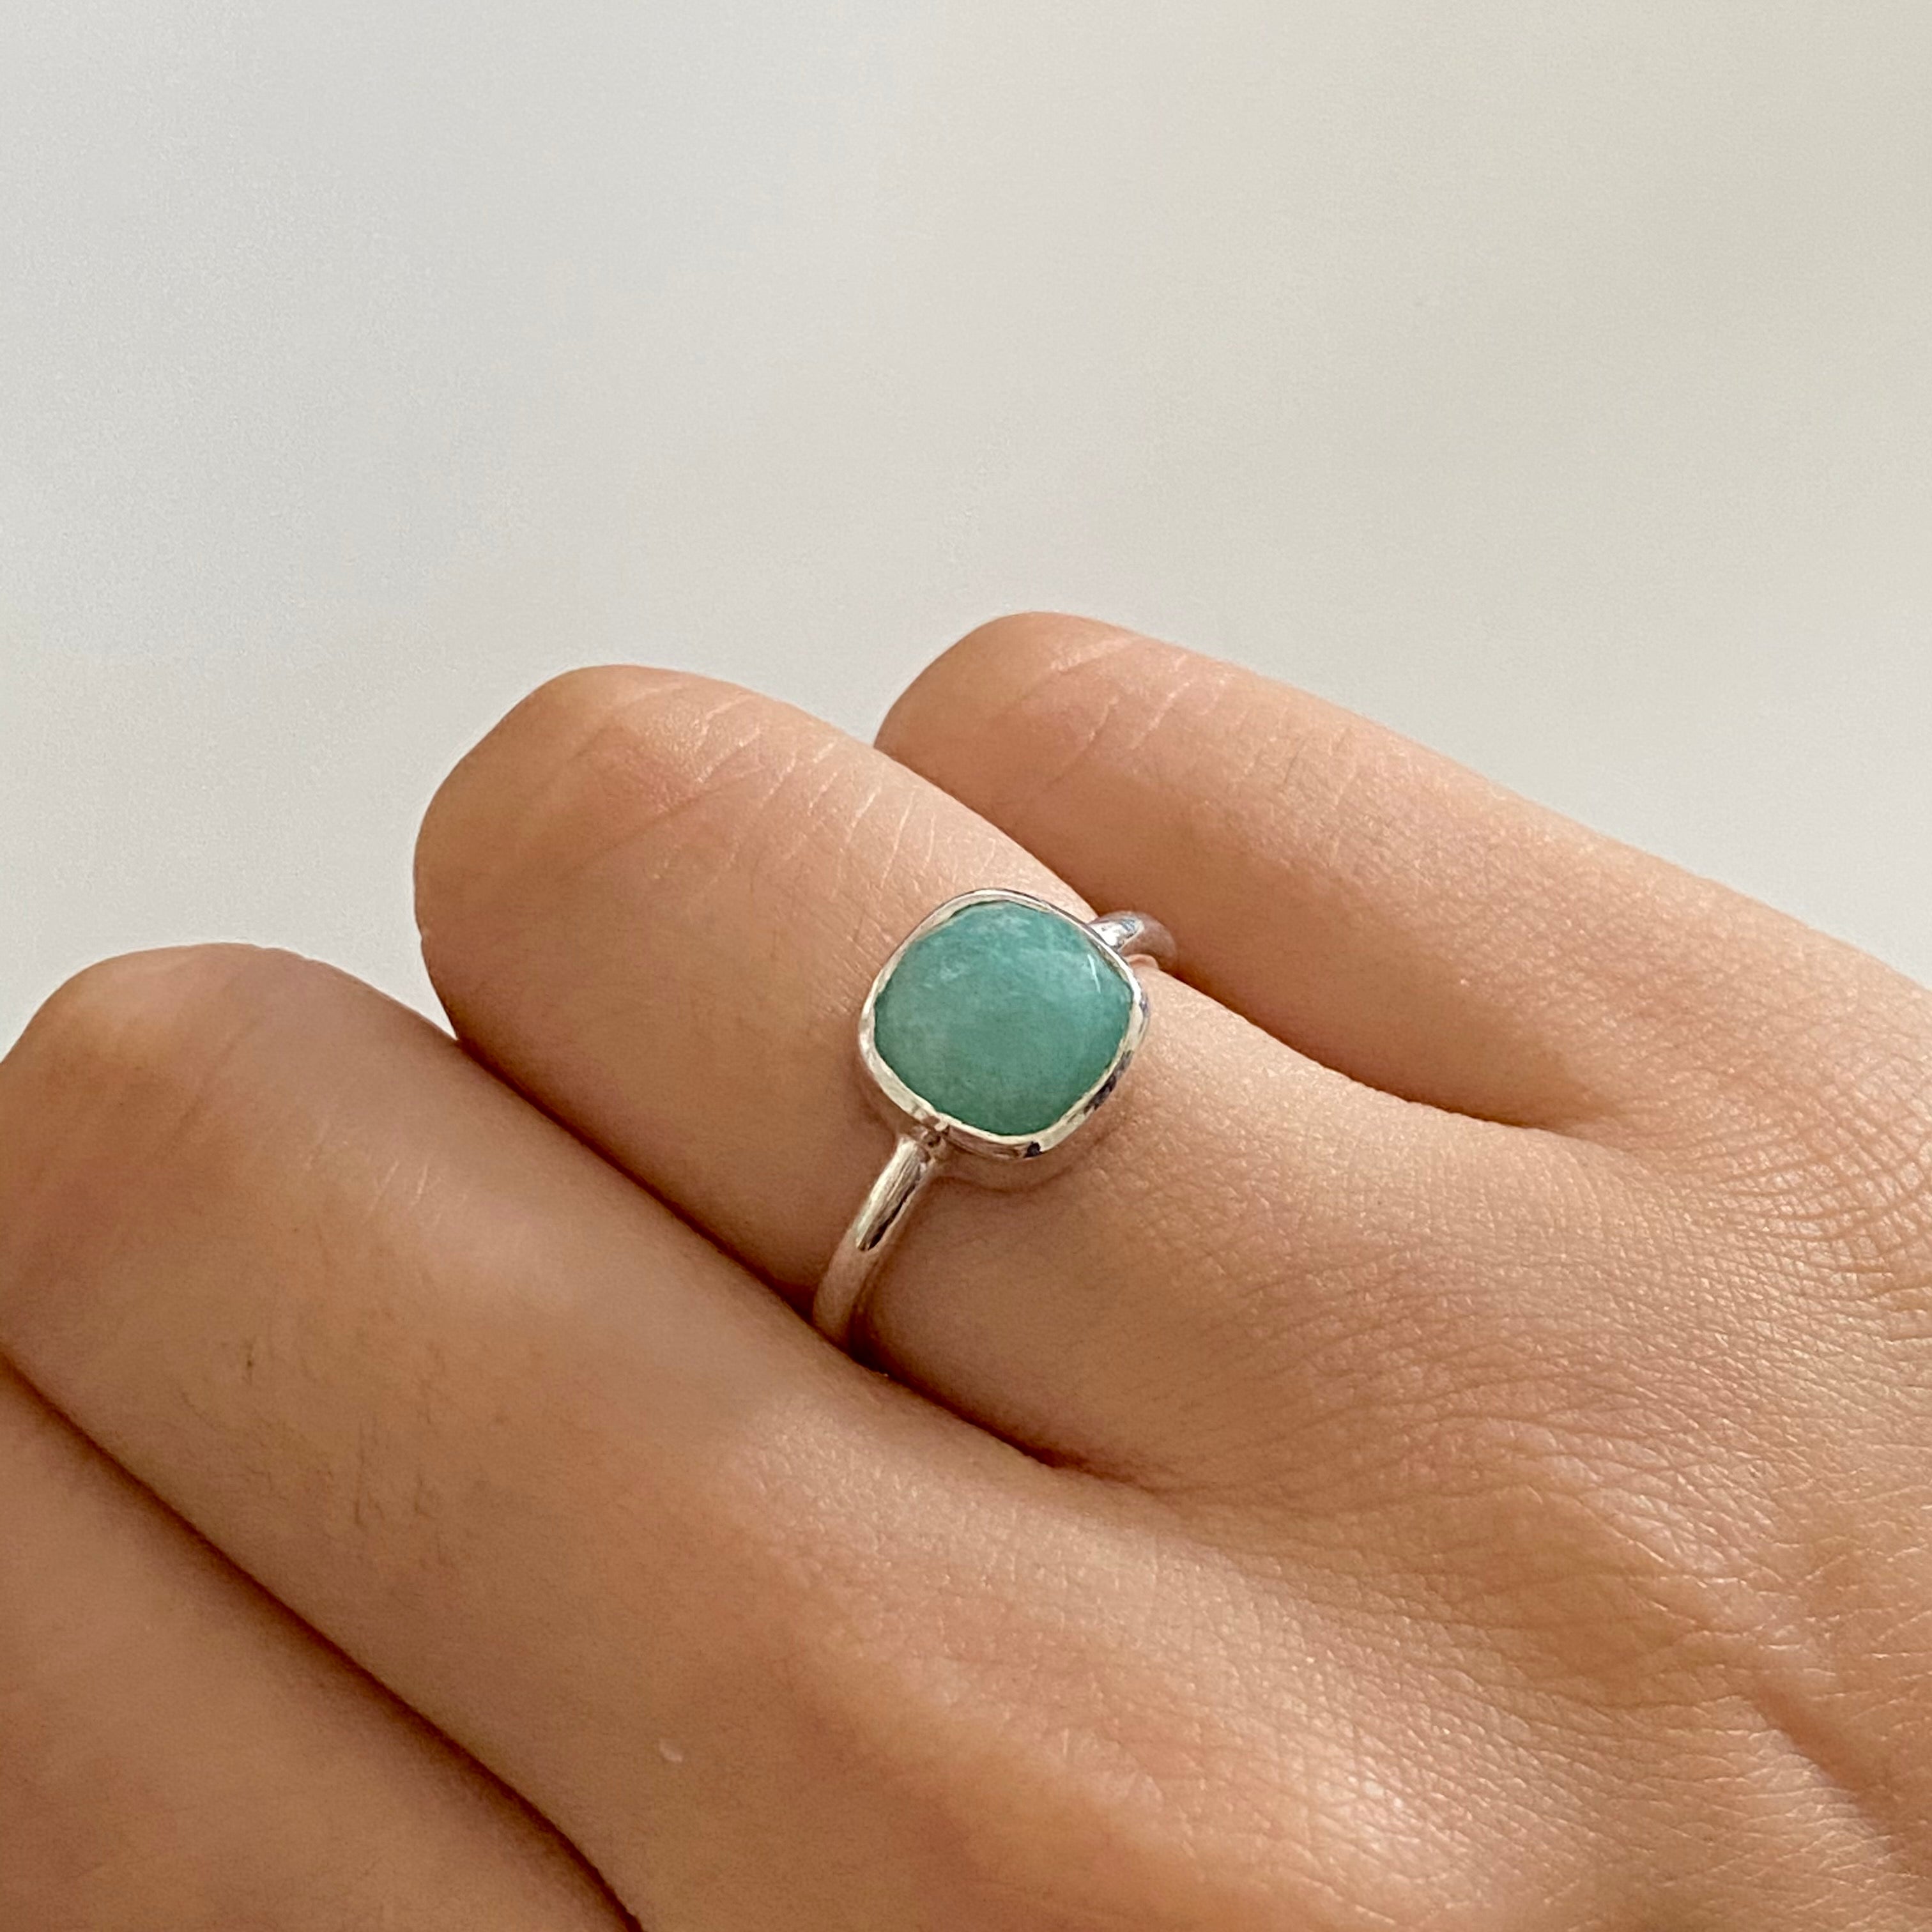 Faceted Square Cut Natural Gemstone Sterling Silver Solitaire Ring - Amazonite